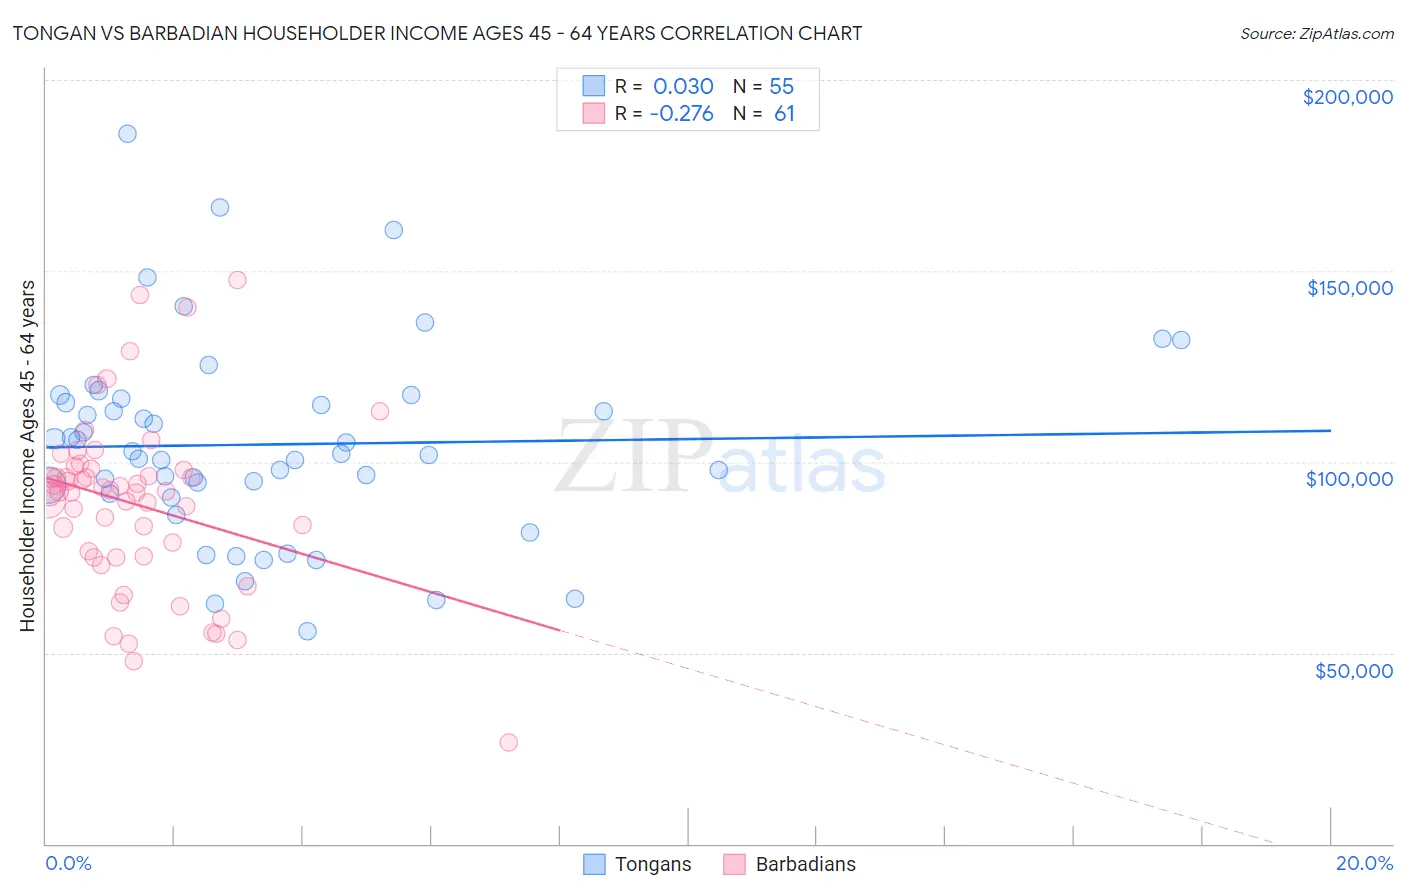 Tongan vs Barbadian Householder Income Ages 45 - 64 years